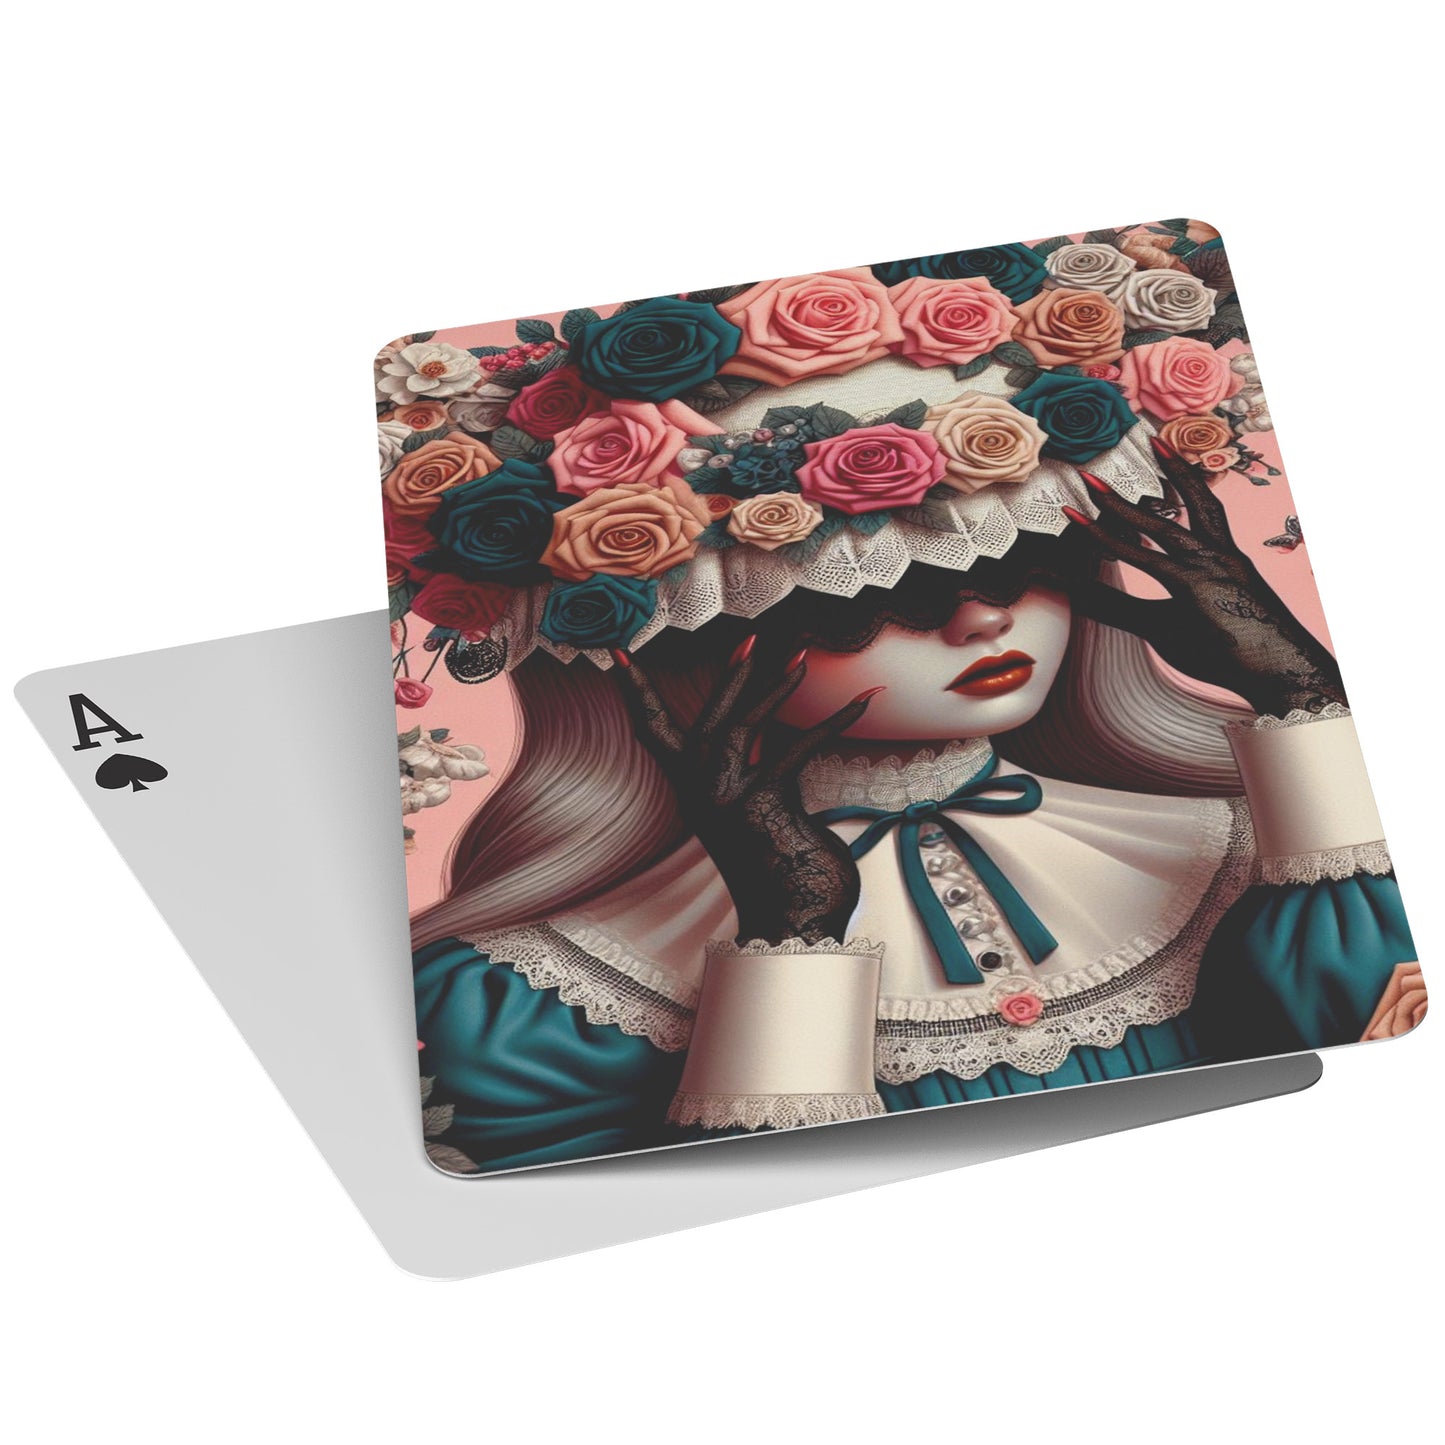 Vintage Whimsigoth Playing Cards - Standard Poker Deck, Limited Edition